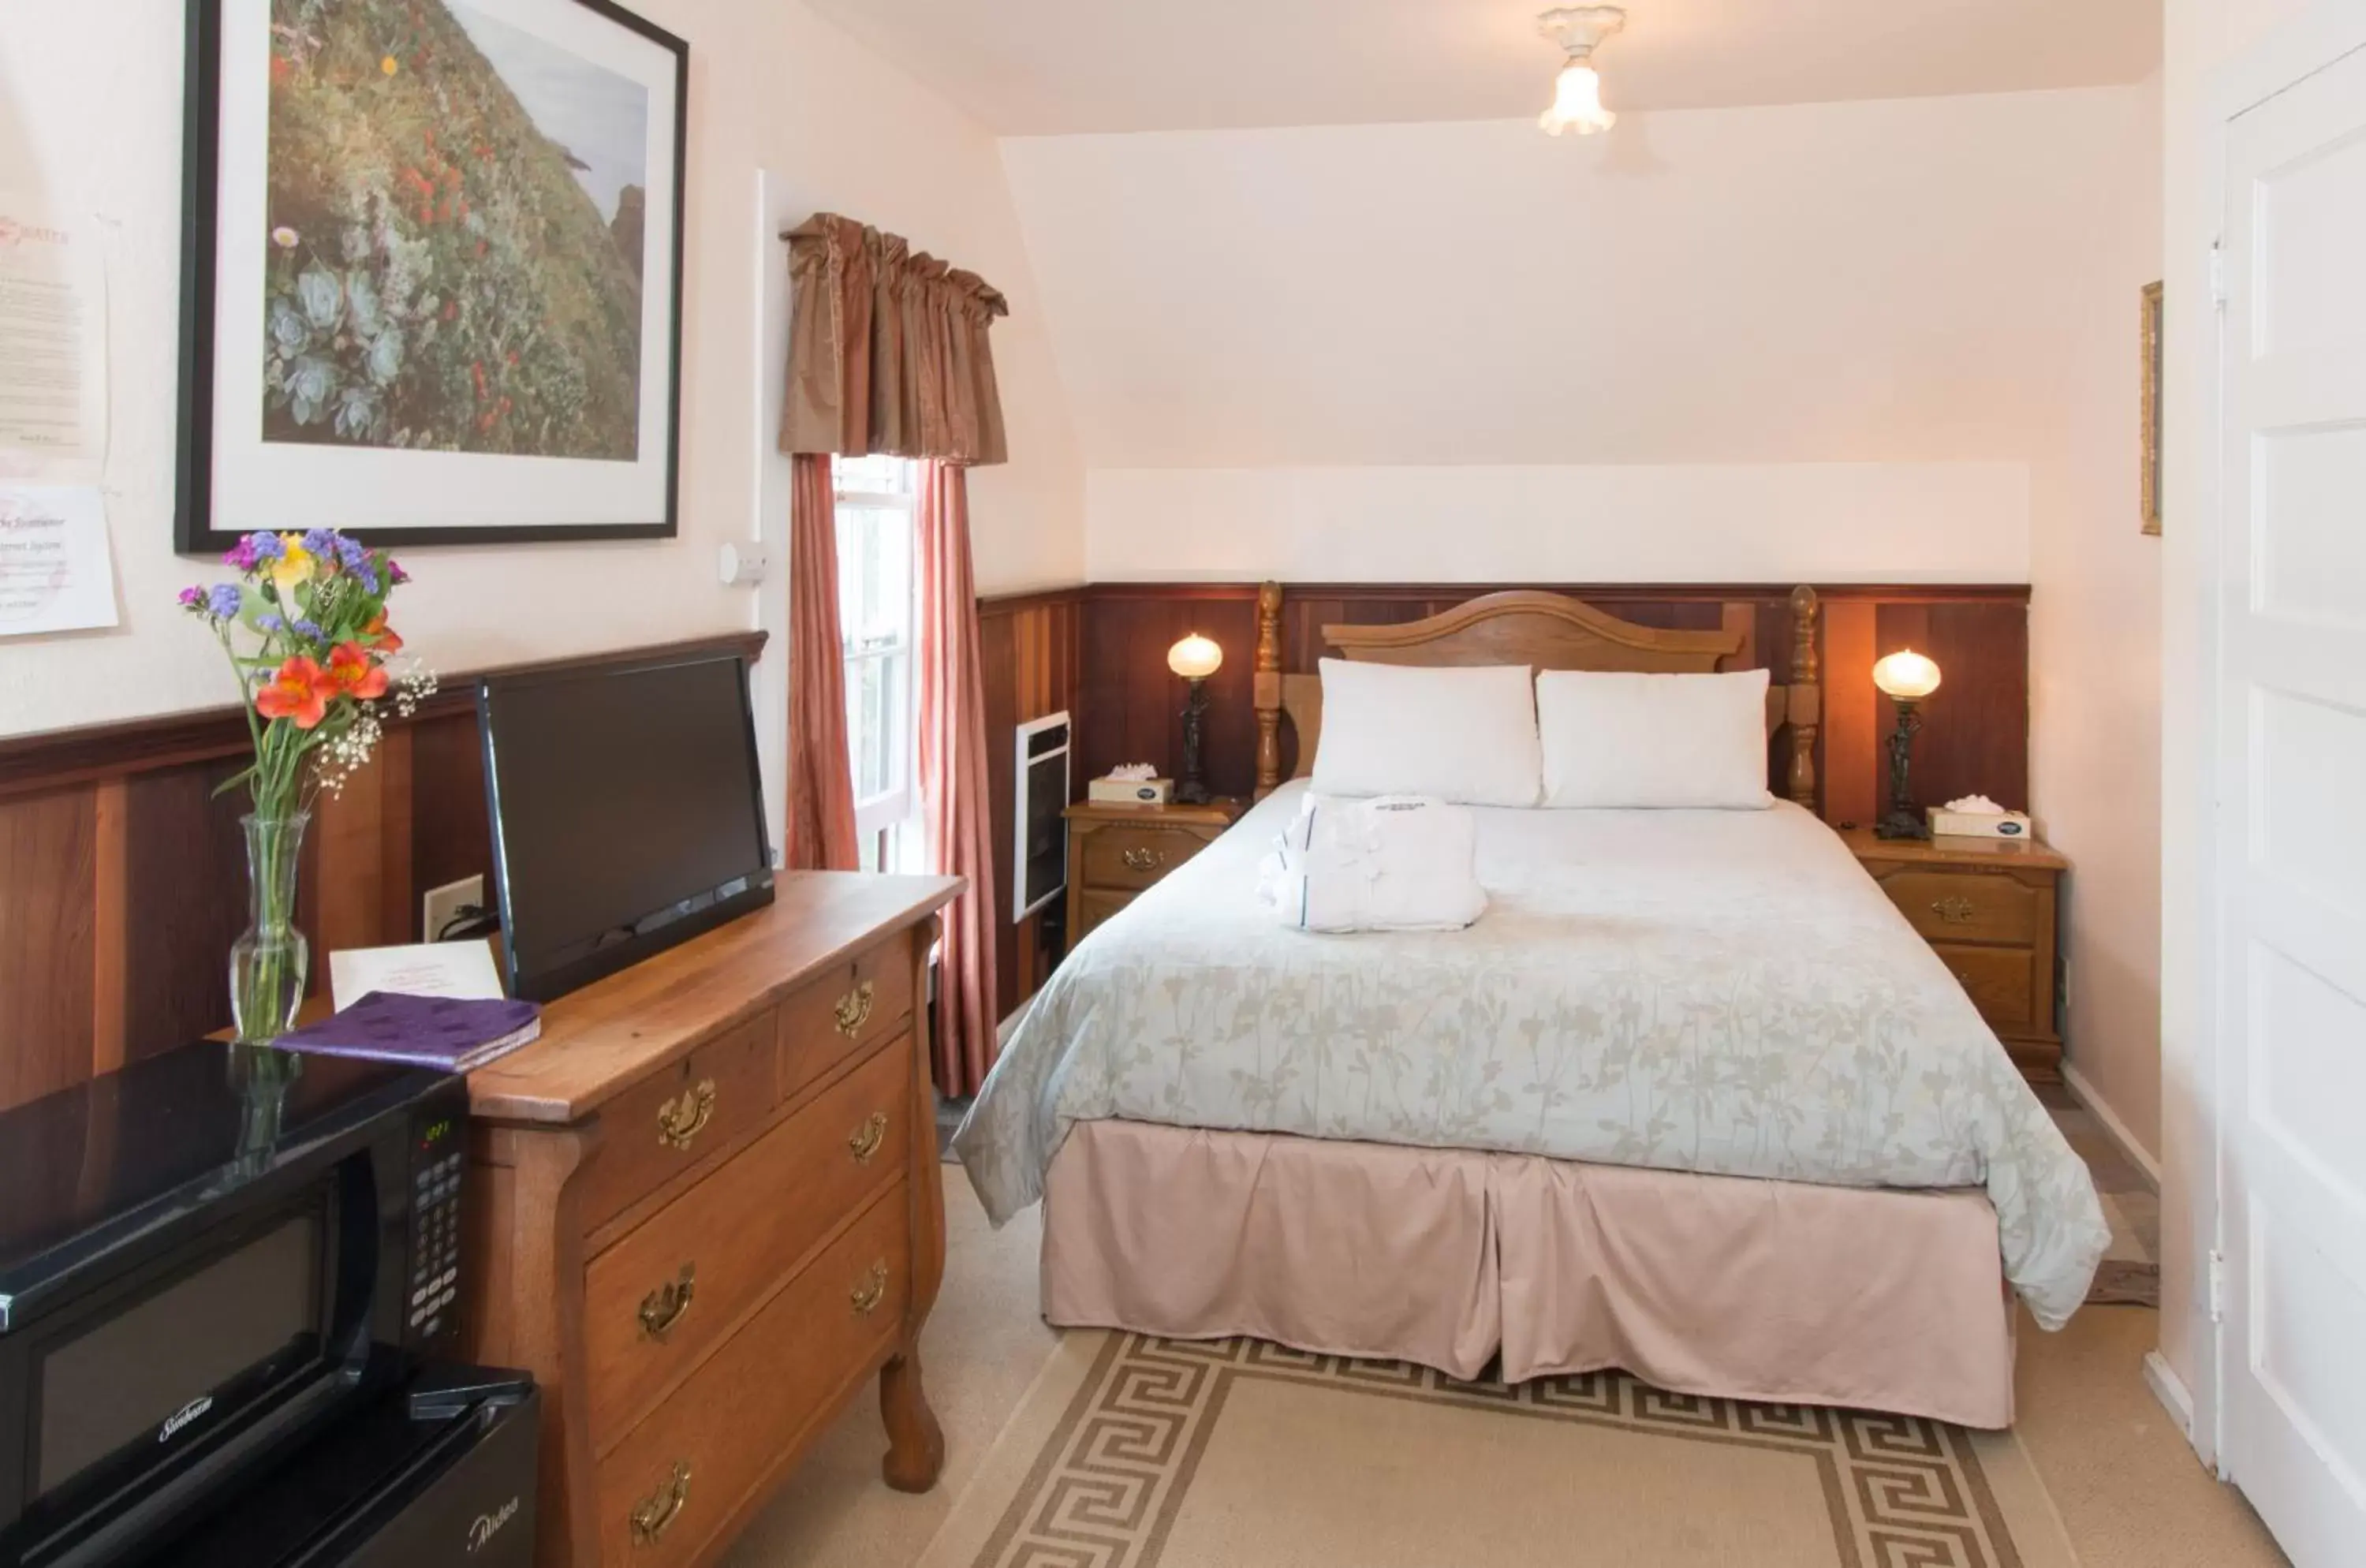 Standard Queen Room - Not Pet Friendly in Sweetwater Inn and Spa